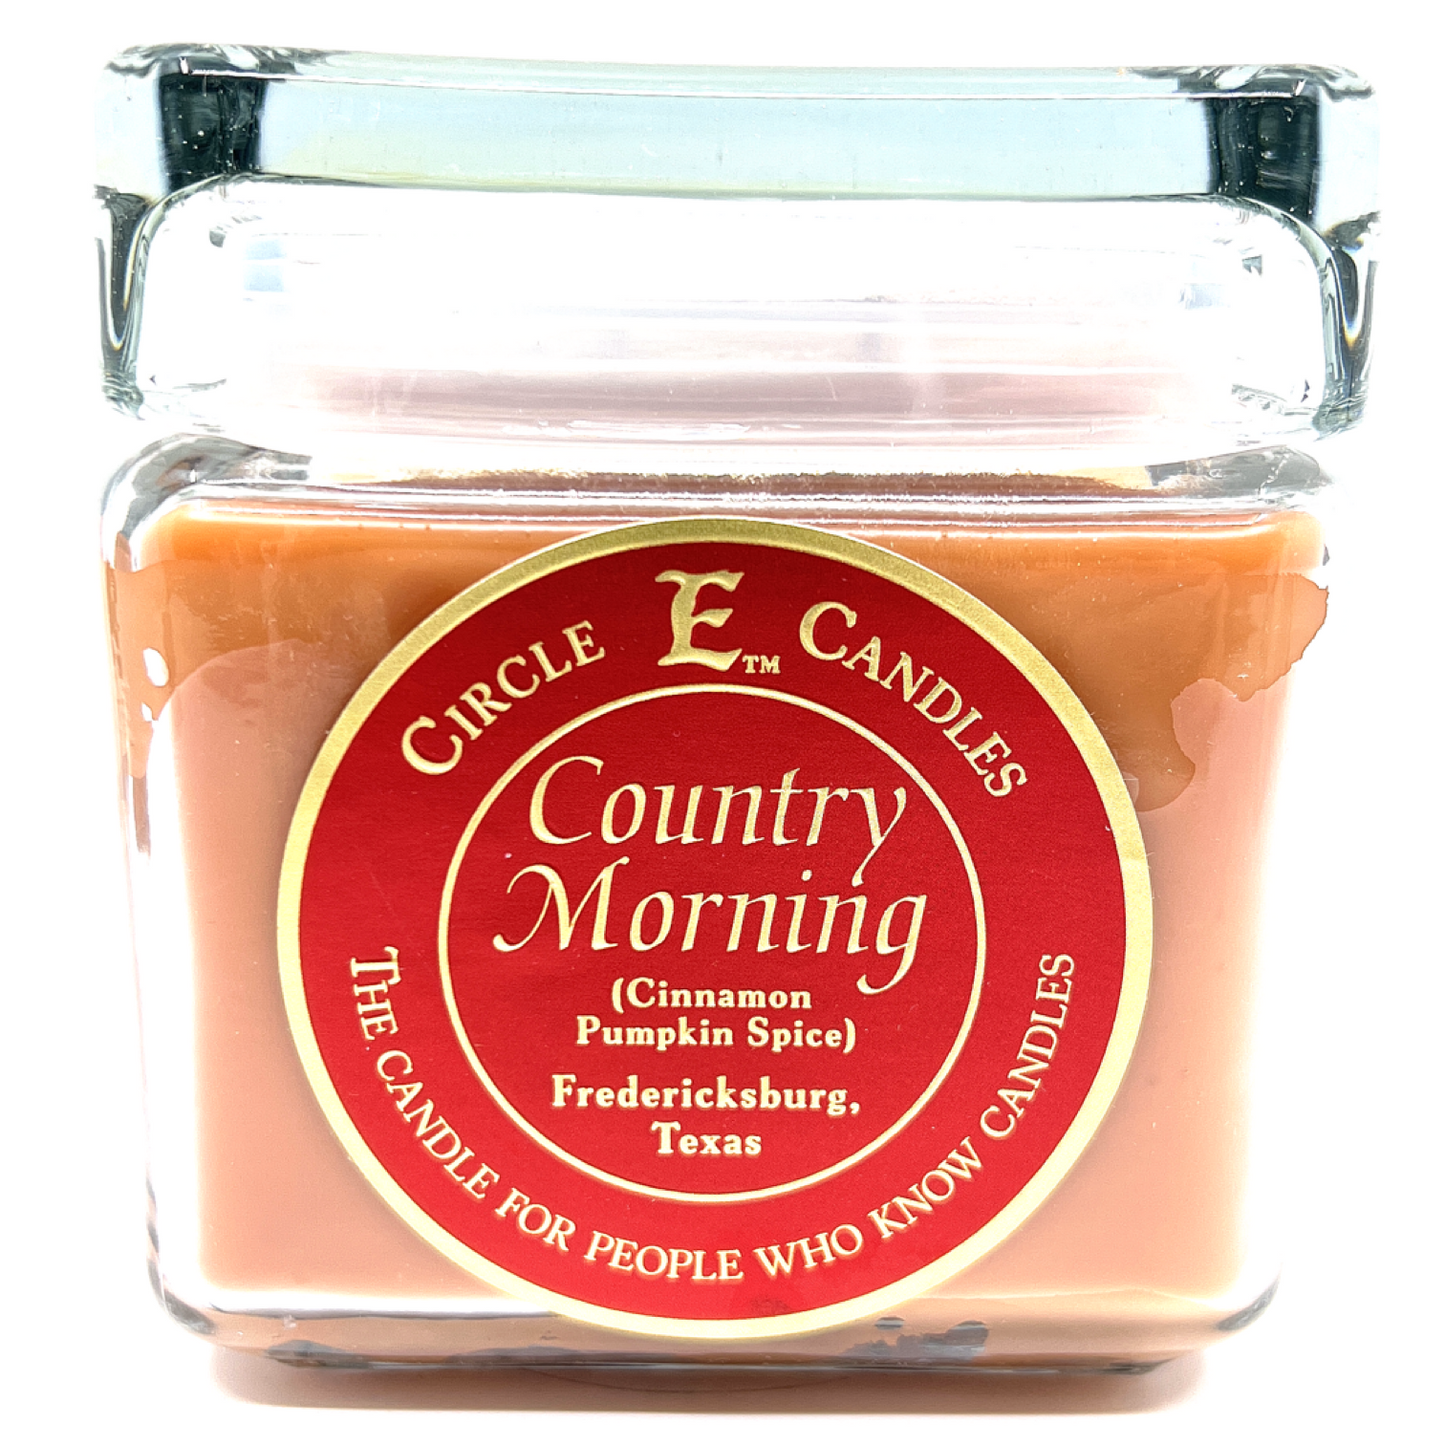 Circle E Candles, Country Morning Scent, Medium Size Jar Candle, 32oz, 2 Wicks